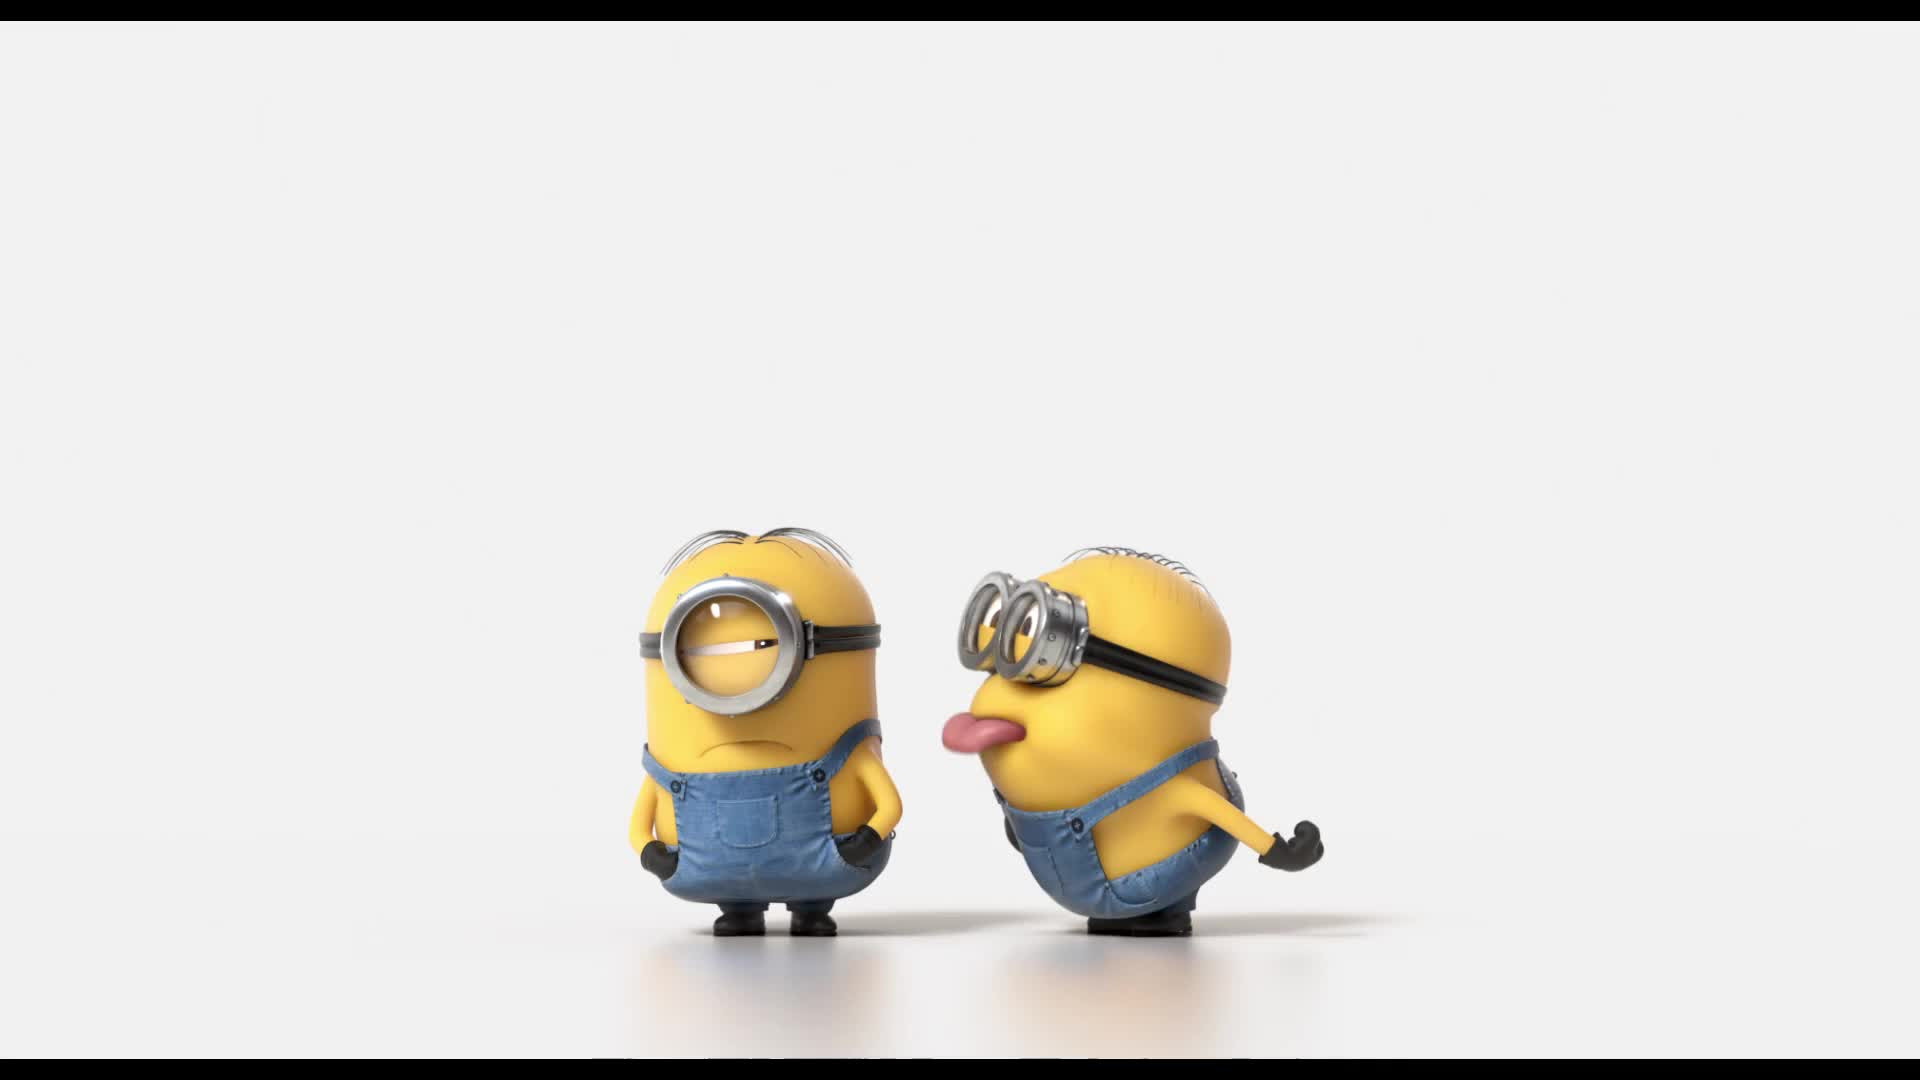 1920x1080 images of minions - Minion Movie Quotes - Minion Movie Quotes